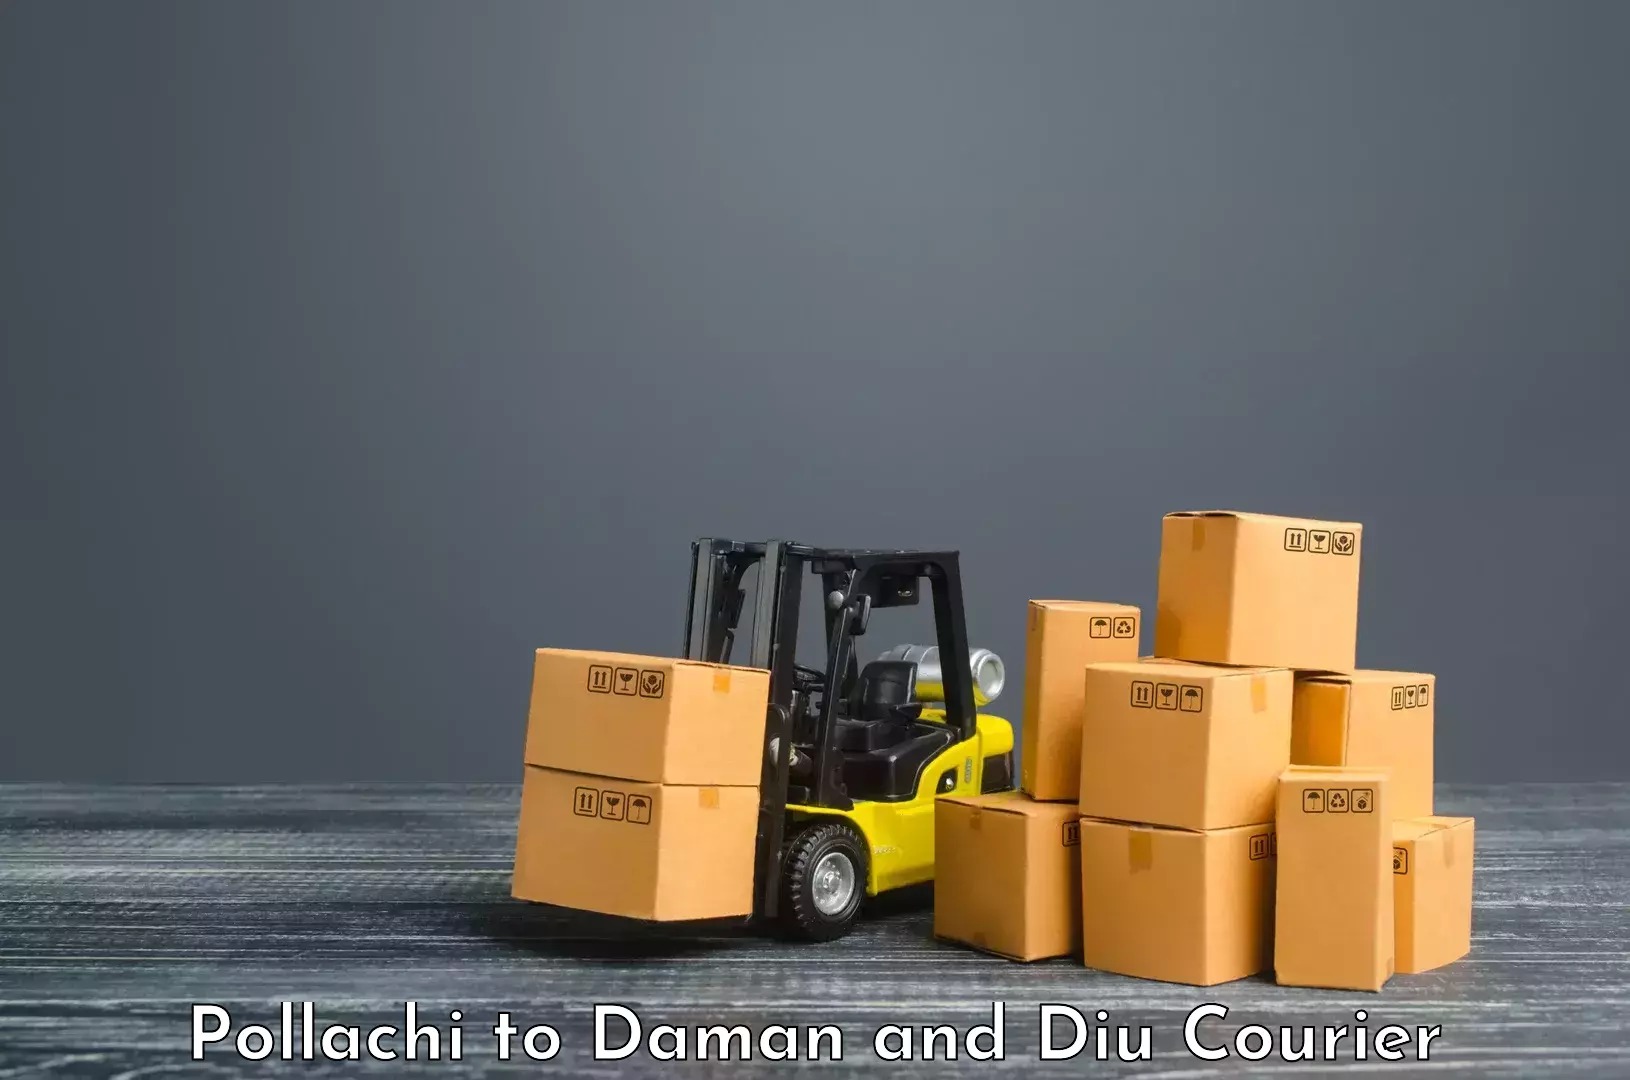 Doorstep delivery service Pollachi to Daman and Diu